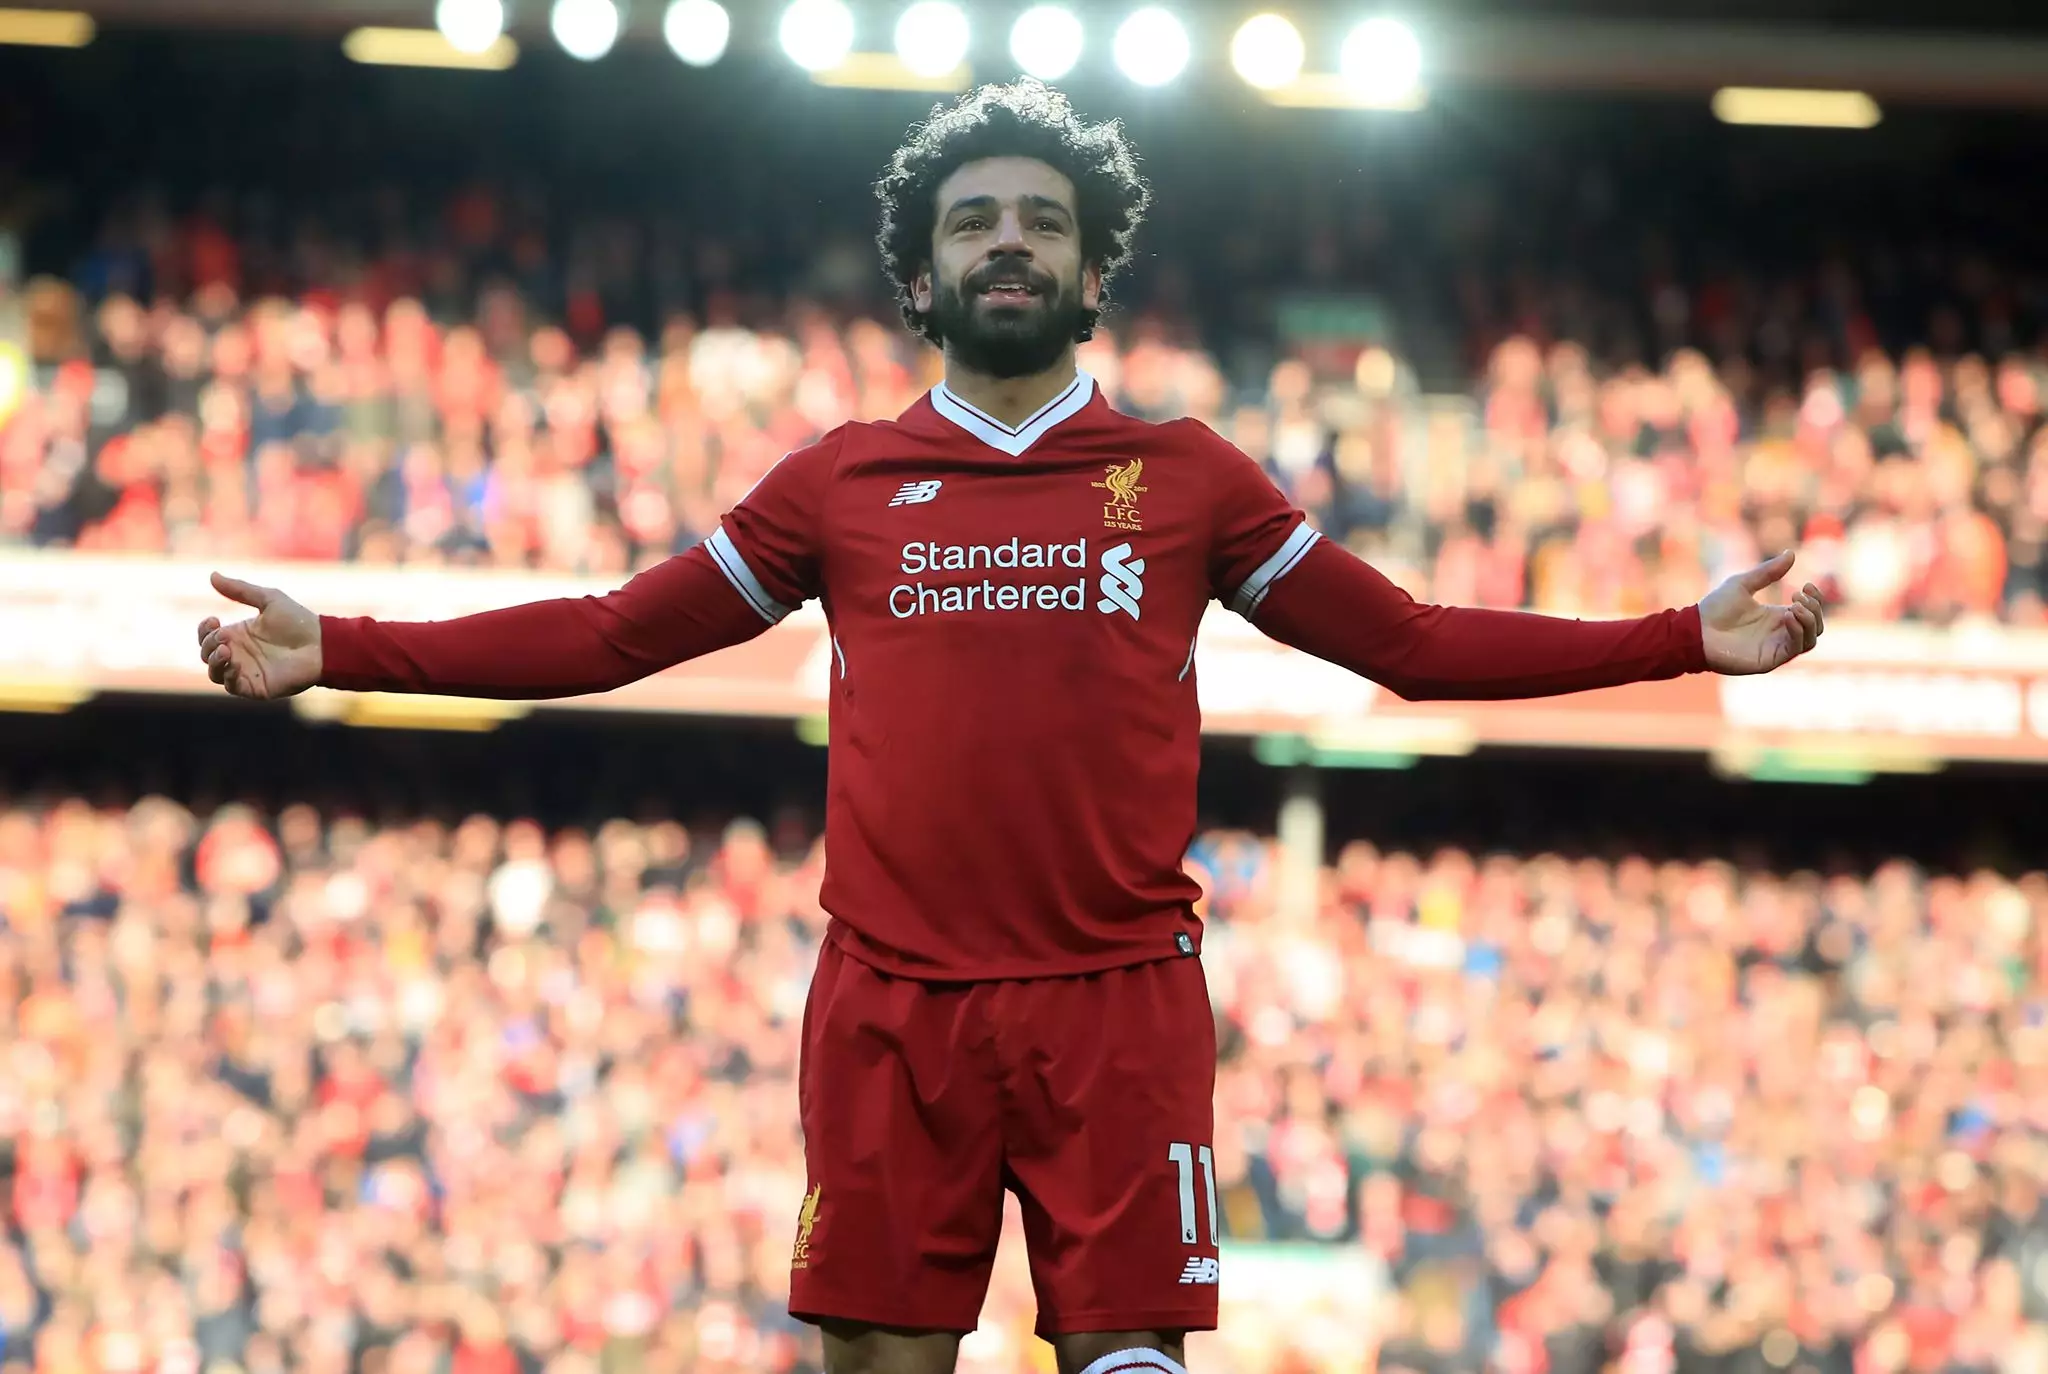 Salah gestures to the Anfield crowd. Image: PA